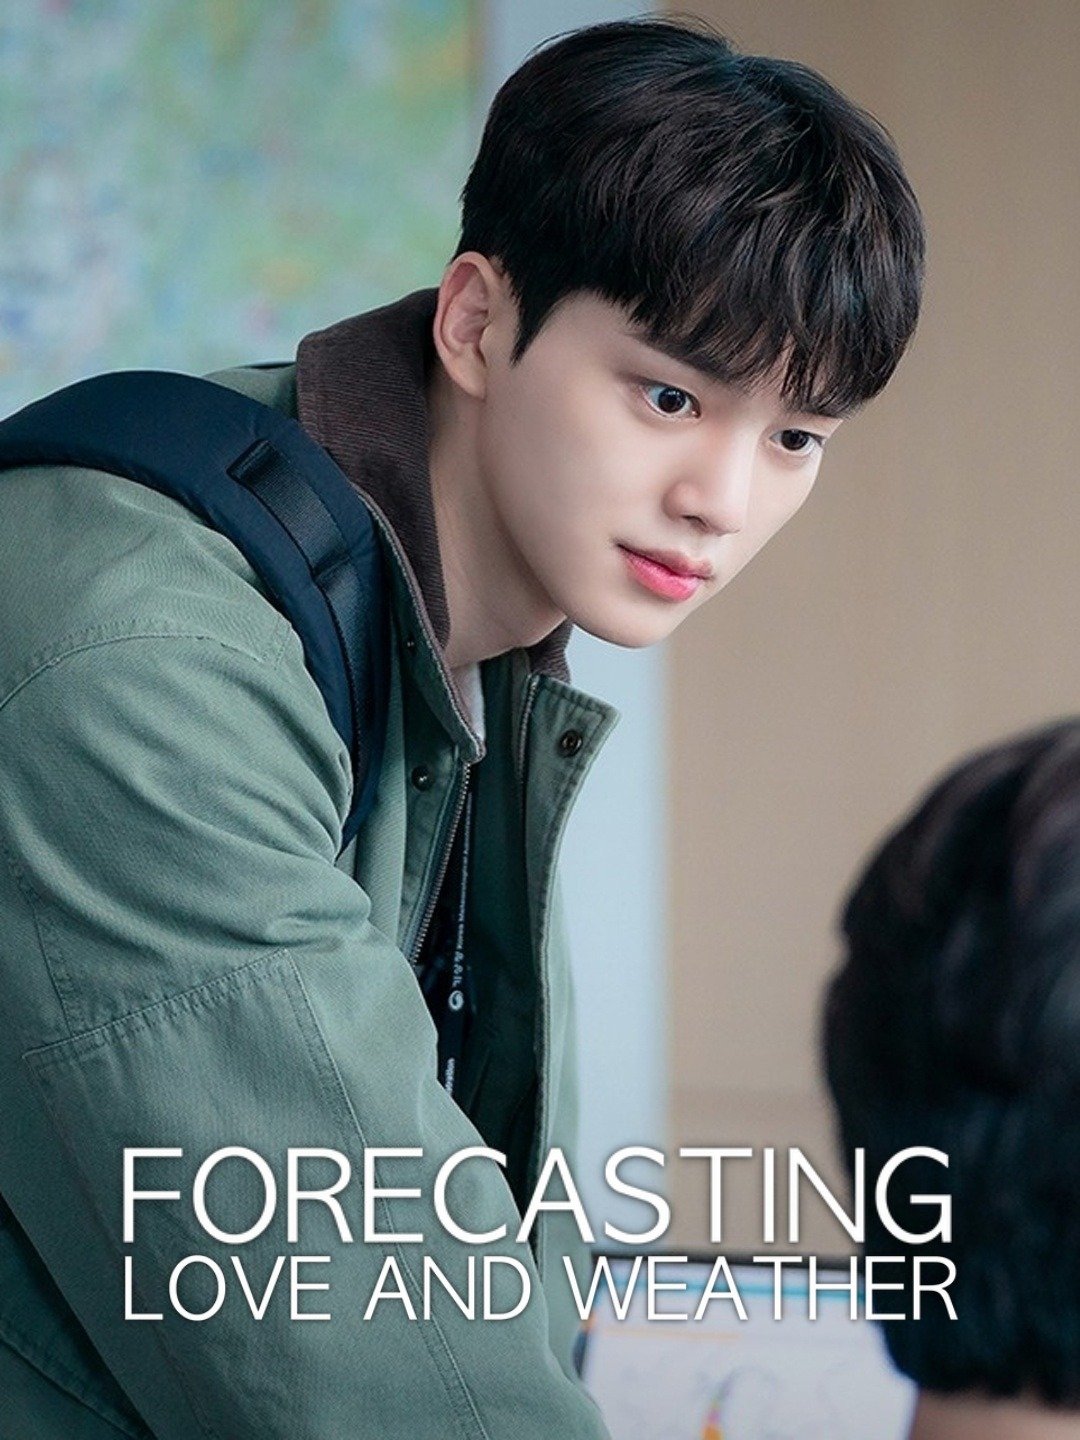 Forecasting love and weather ep 1